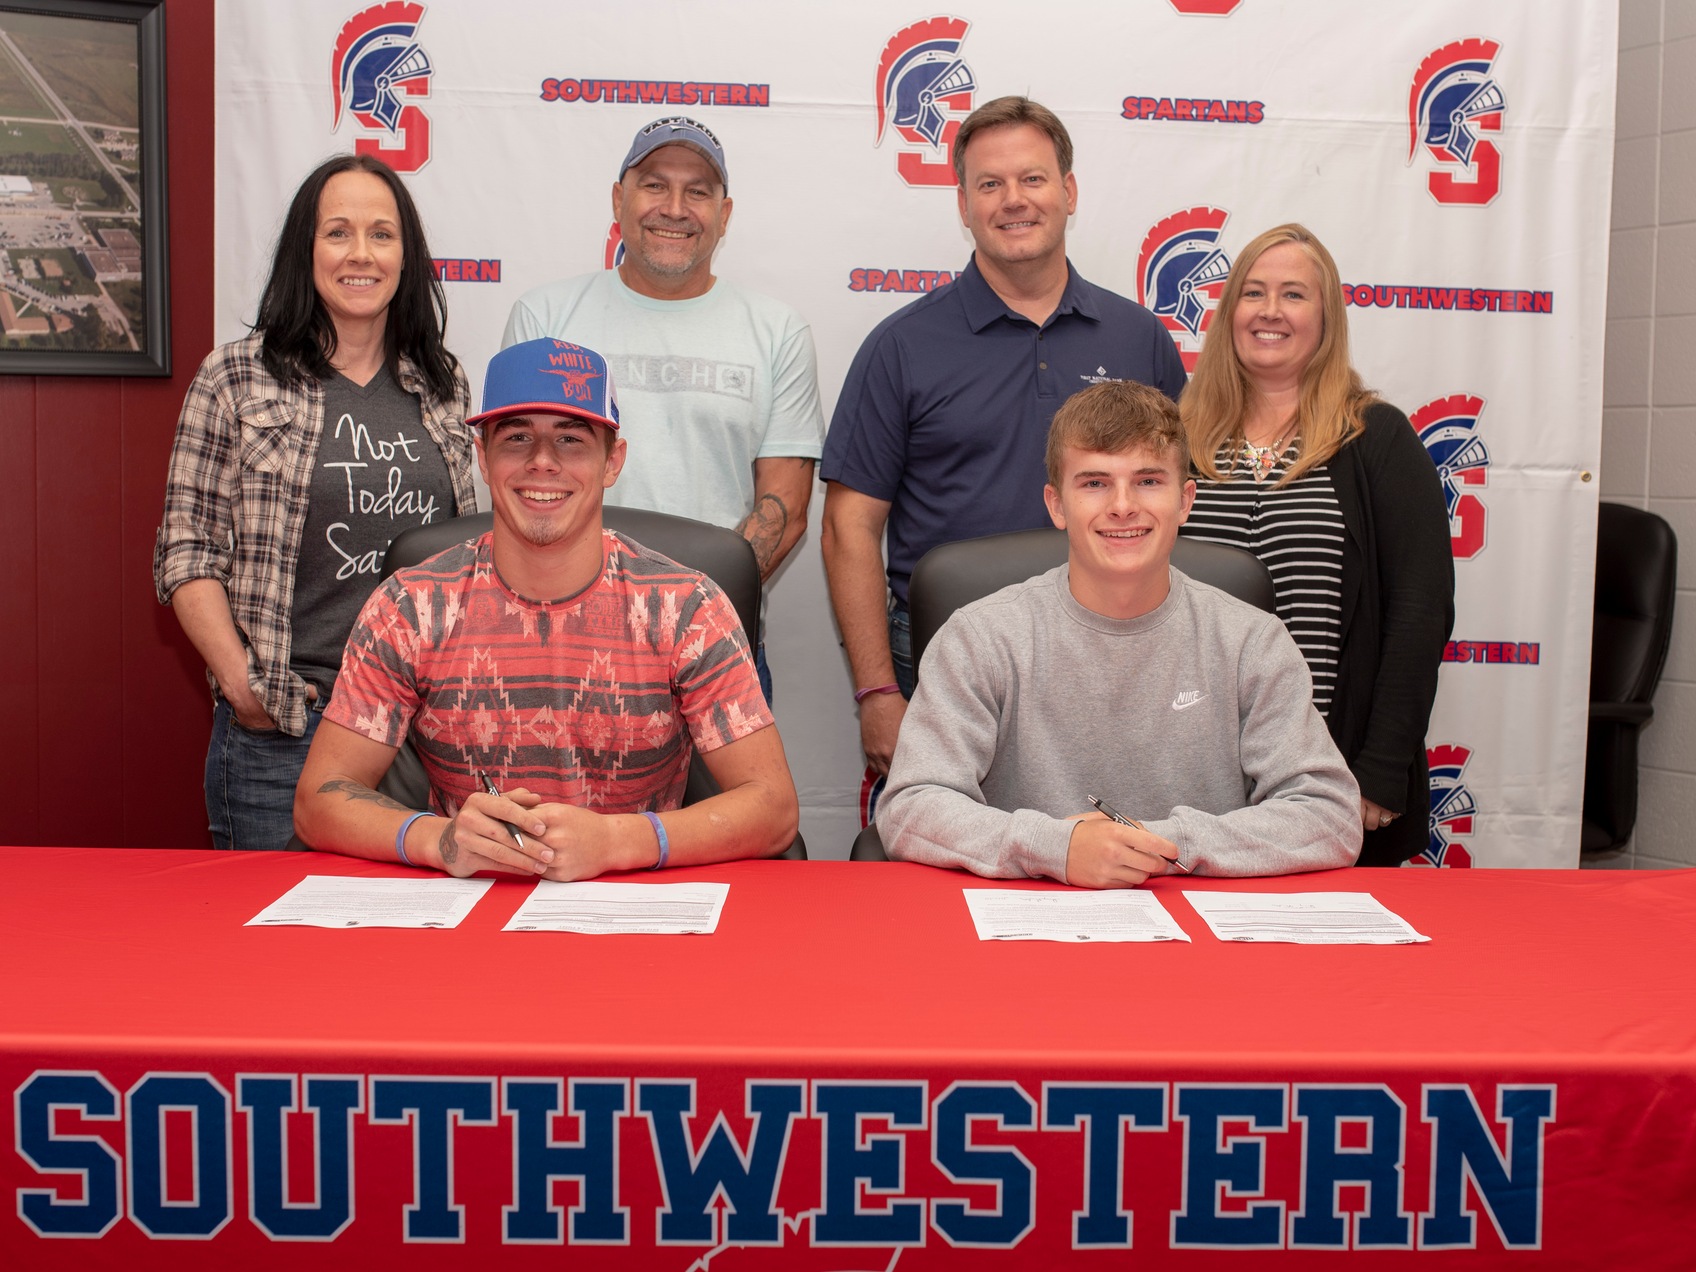 Recent Mount Ayr graduates Hunter Haveman and Connor Eaton sign their National Letters of Intent to join the Southwestern track and field team for the 2019-20 season.